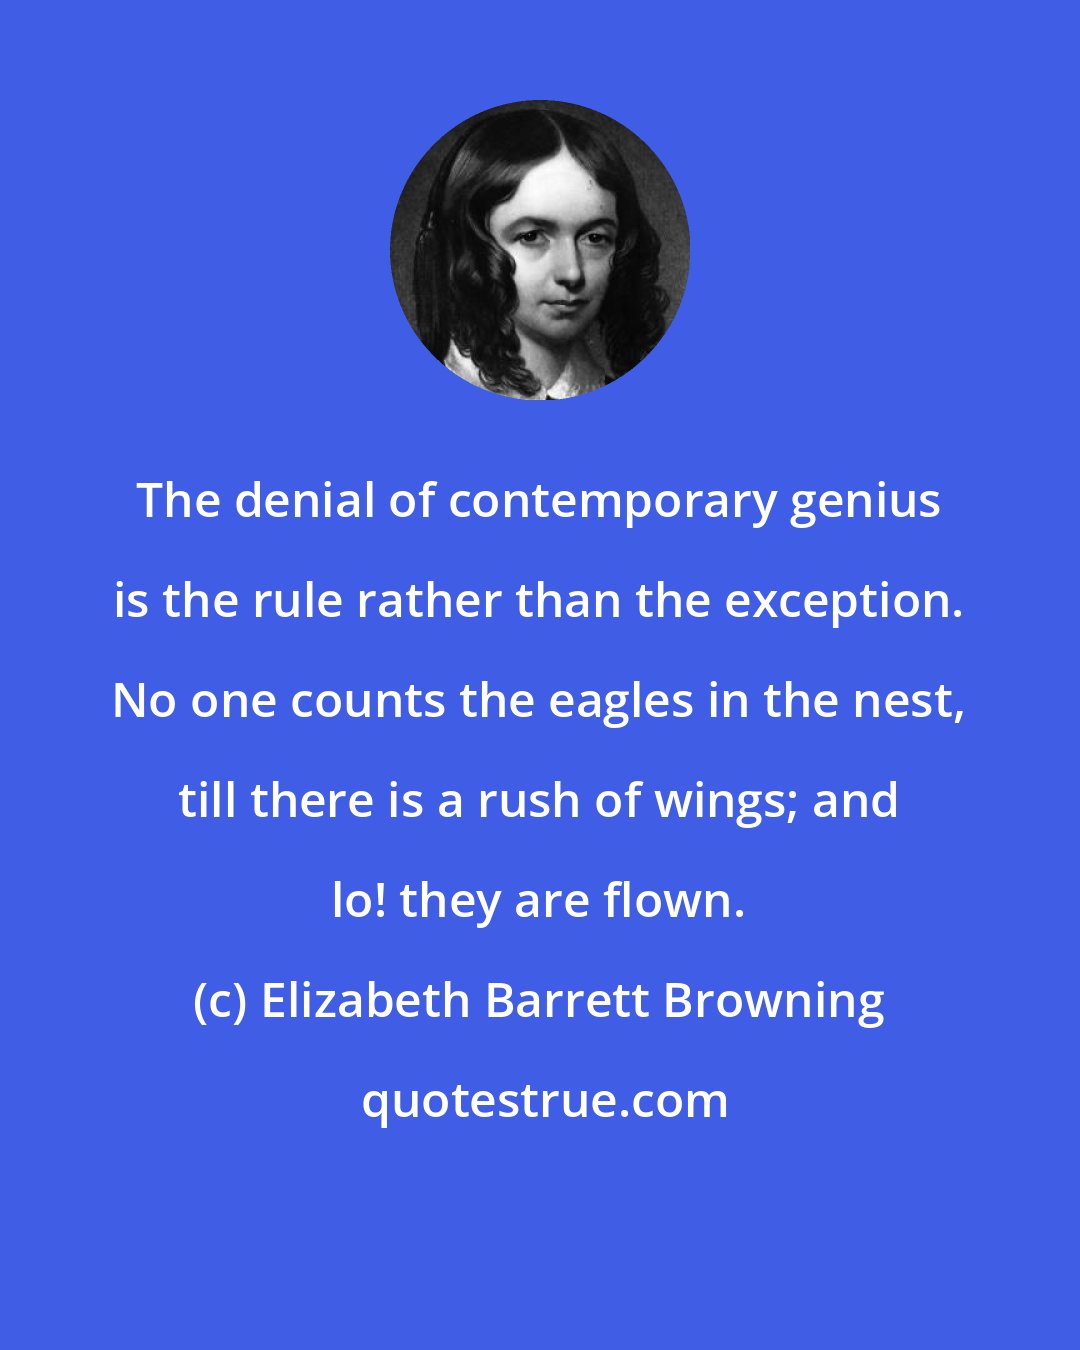 Elizabeth Barrett Browning: The denial of contemporary genius is the rule rather than the exception. No one counts the eagles in the nest, till there is a rush of wings; and lo! they are flown.